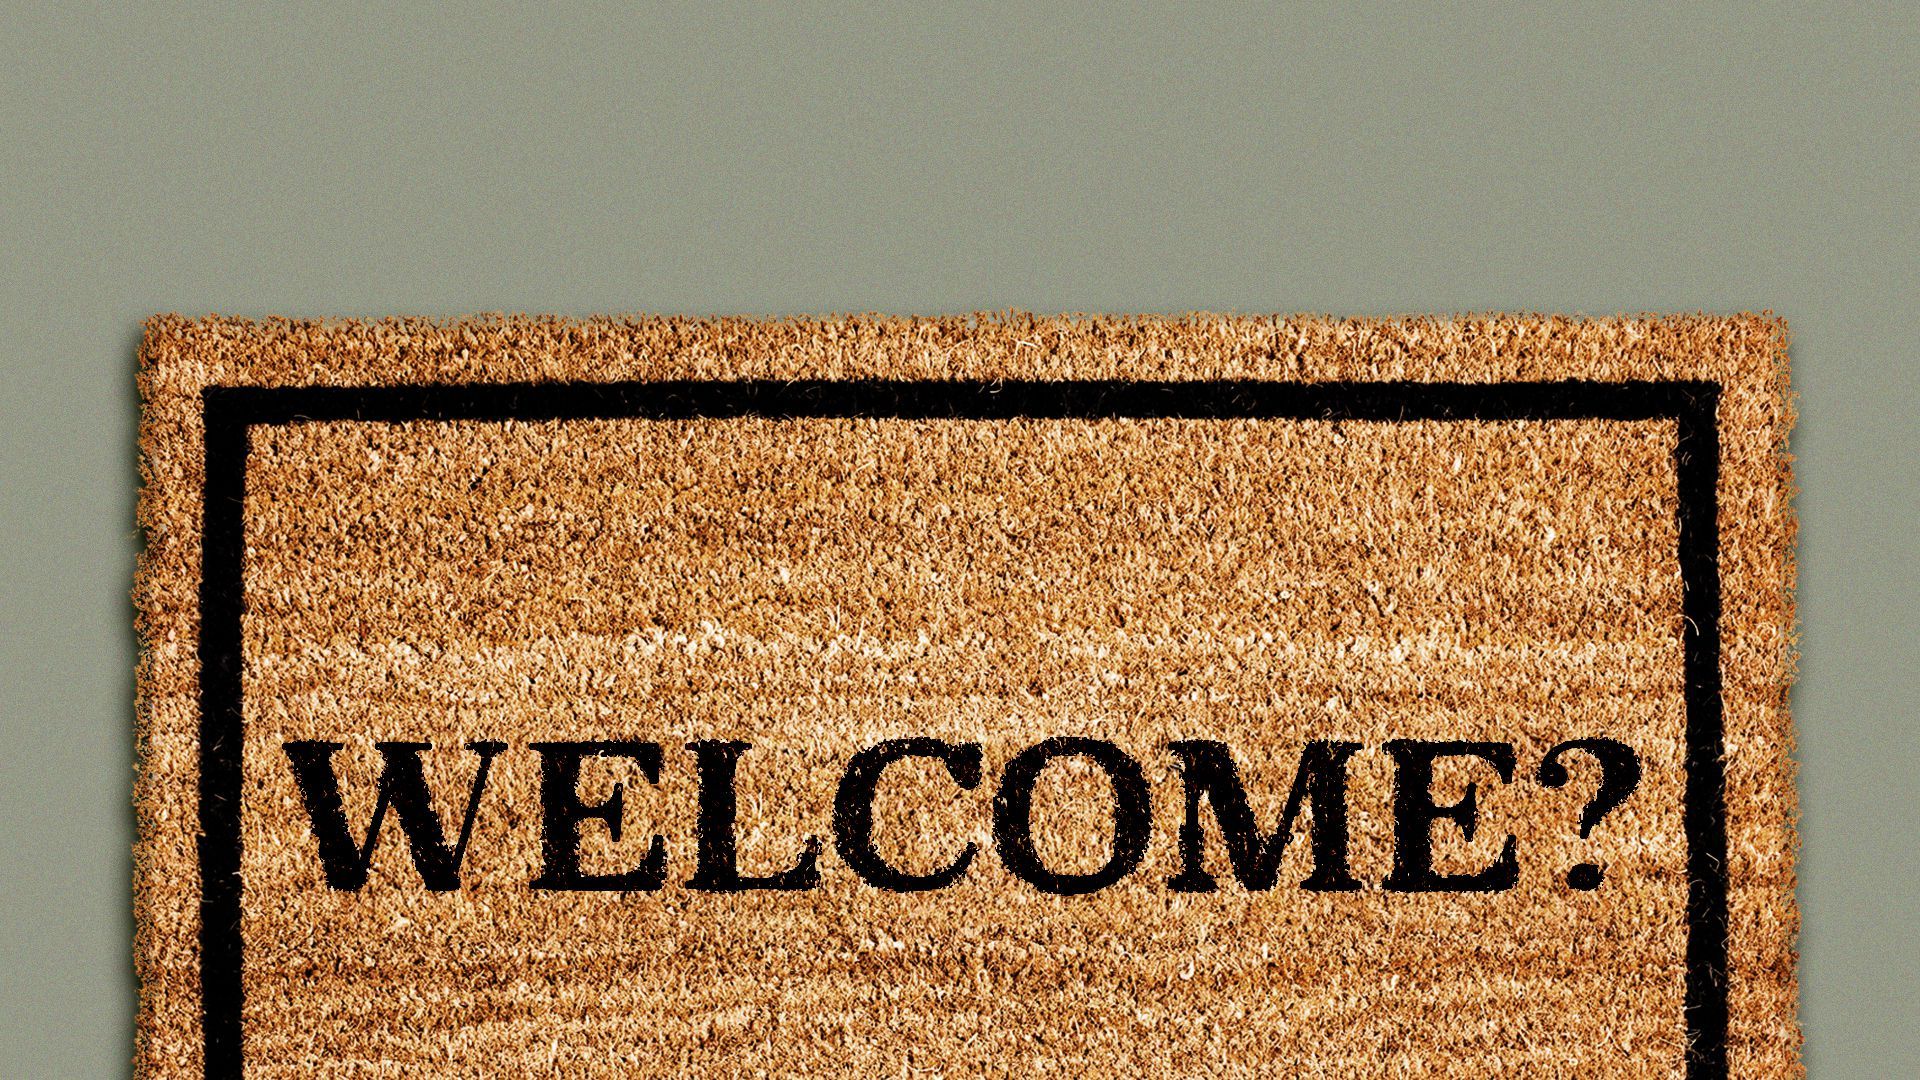 Illustration of a welcome mat but it says "Welcome?"